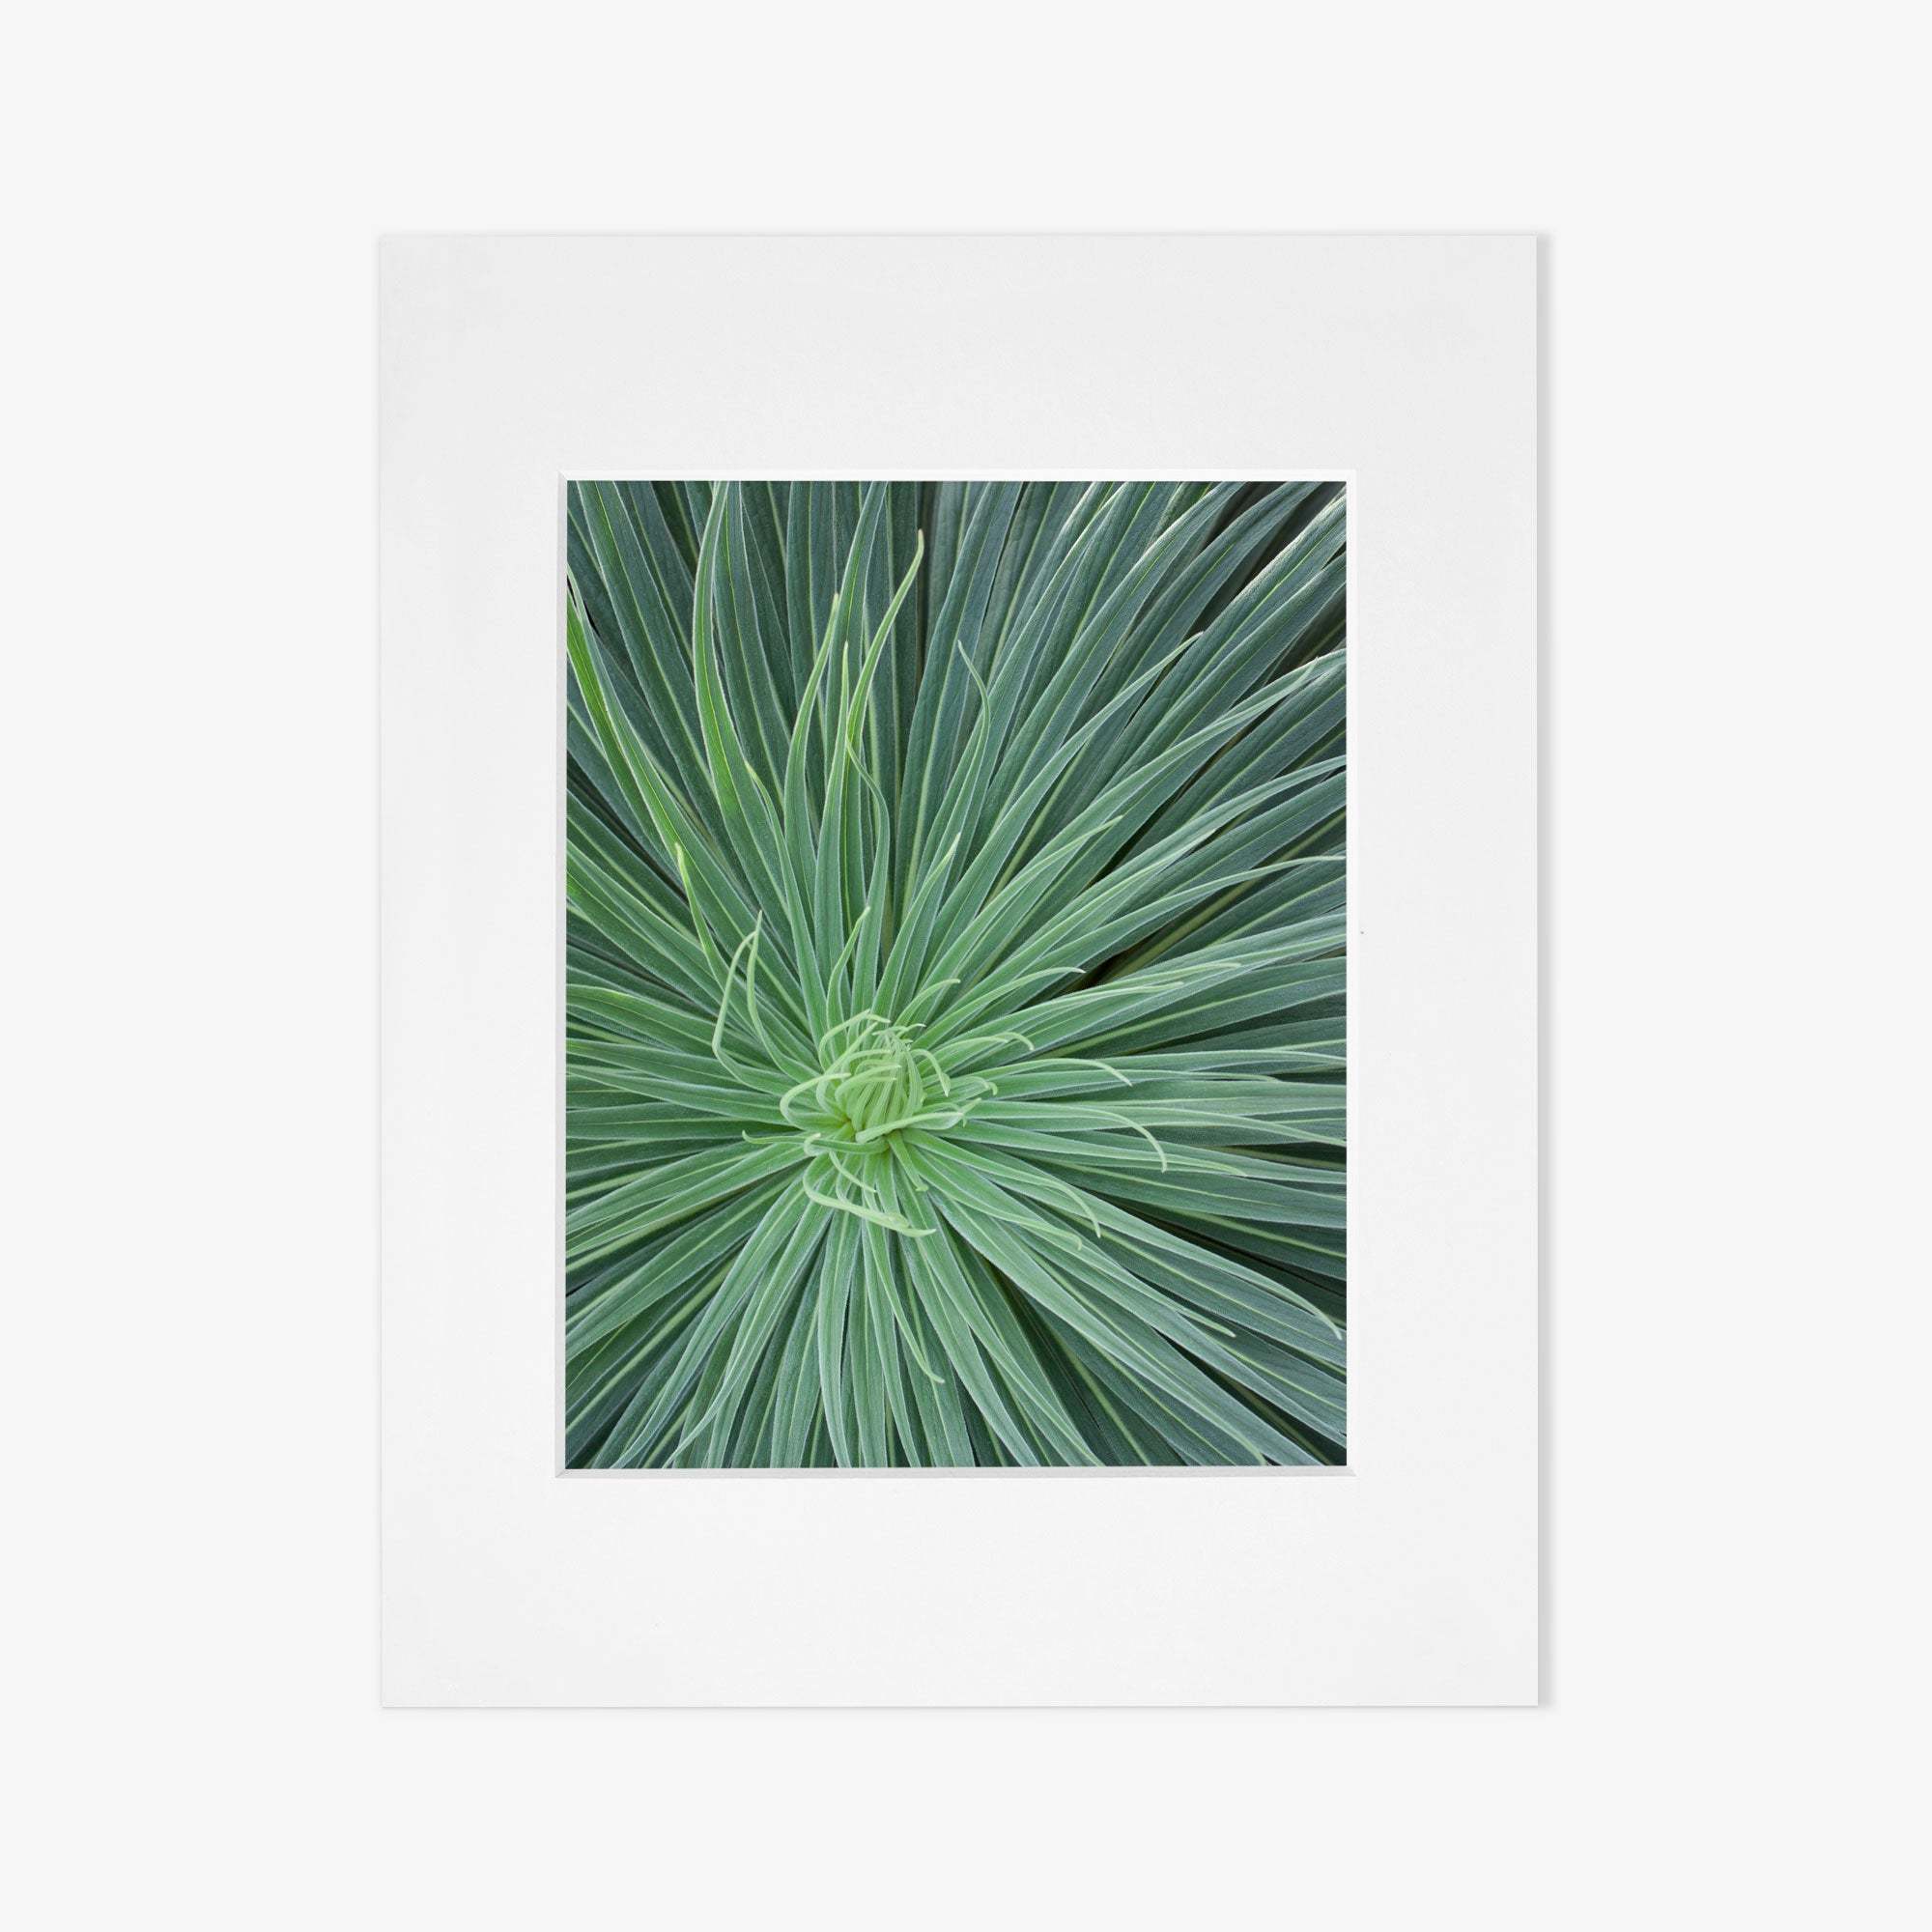 A simple white square picture frame featuring a centered, smaller grey square of Green Botanical Wall Art &#39;Desert Fireworks II&#39; photography on archival photographic paper, against a white background. Minimalist design with a non glossy lustre finish by Offley Green.